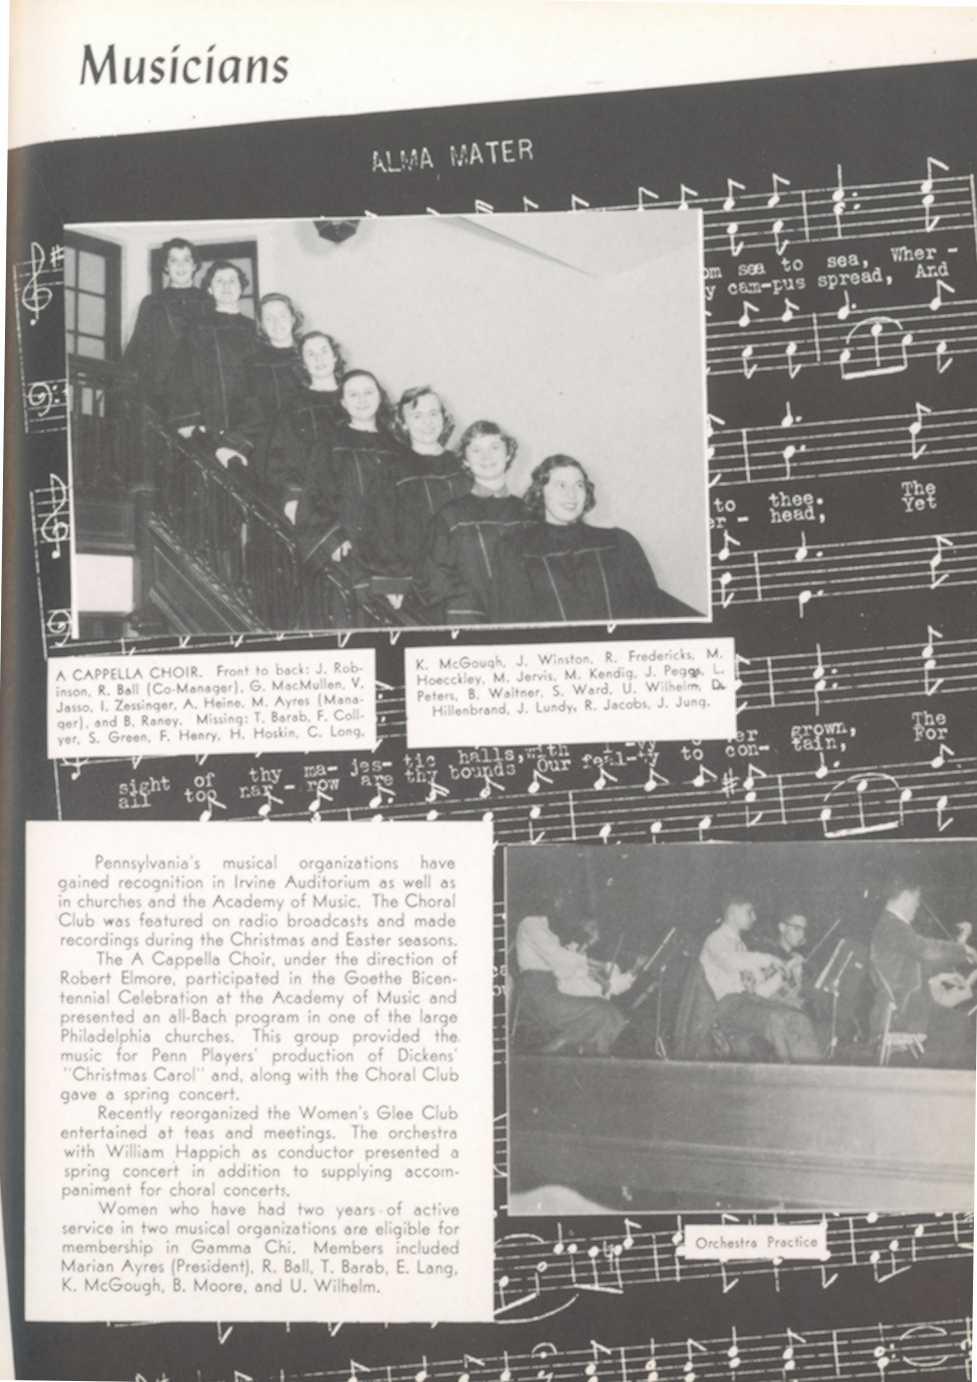 oll ntennial Musician s A CAPPELLA CHOIR Front to back : J R R Ball (Co-Man age r ), G MacMullen, obinson, V Jasso, I Zessinger, A Heine, M Ayres (Man and B Raney Missing: T Barab, F C ager), ye r, S